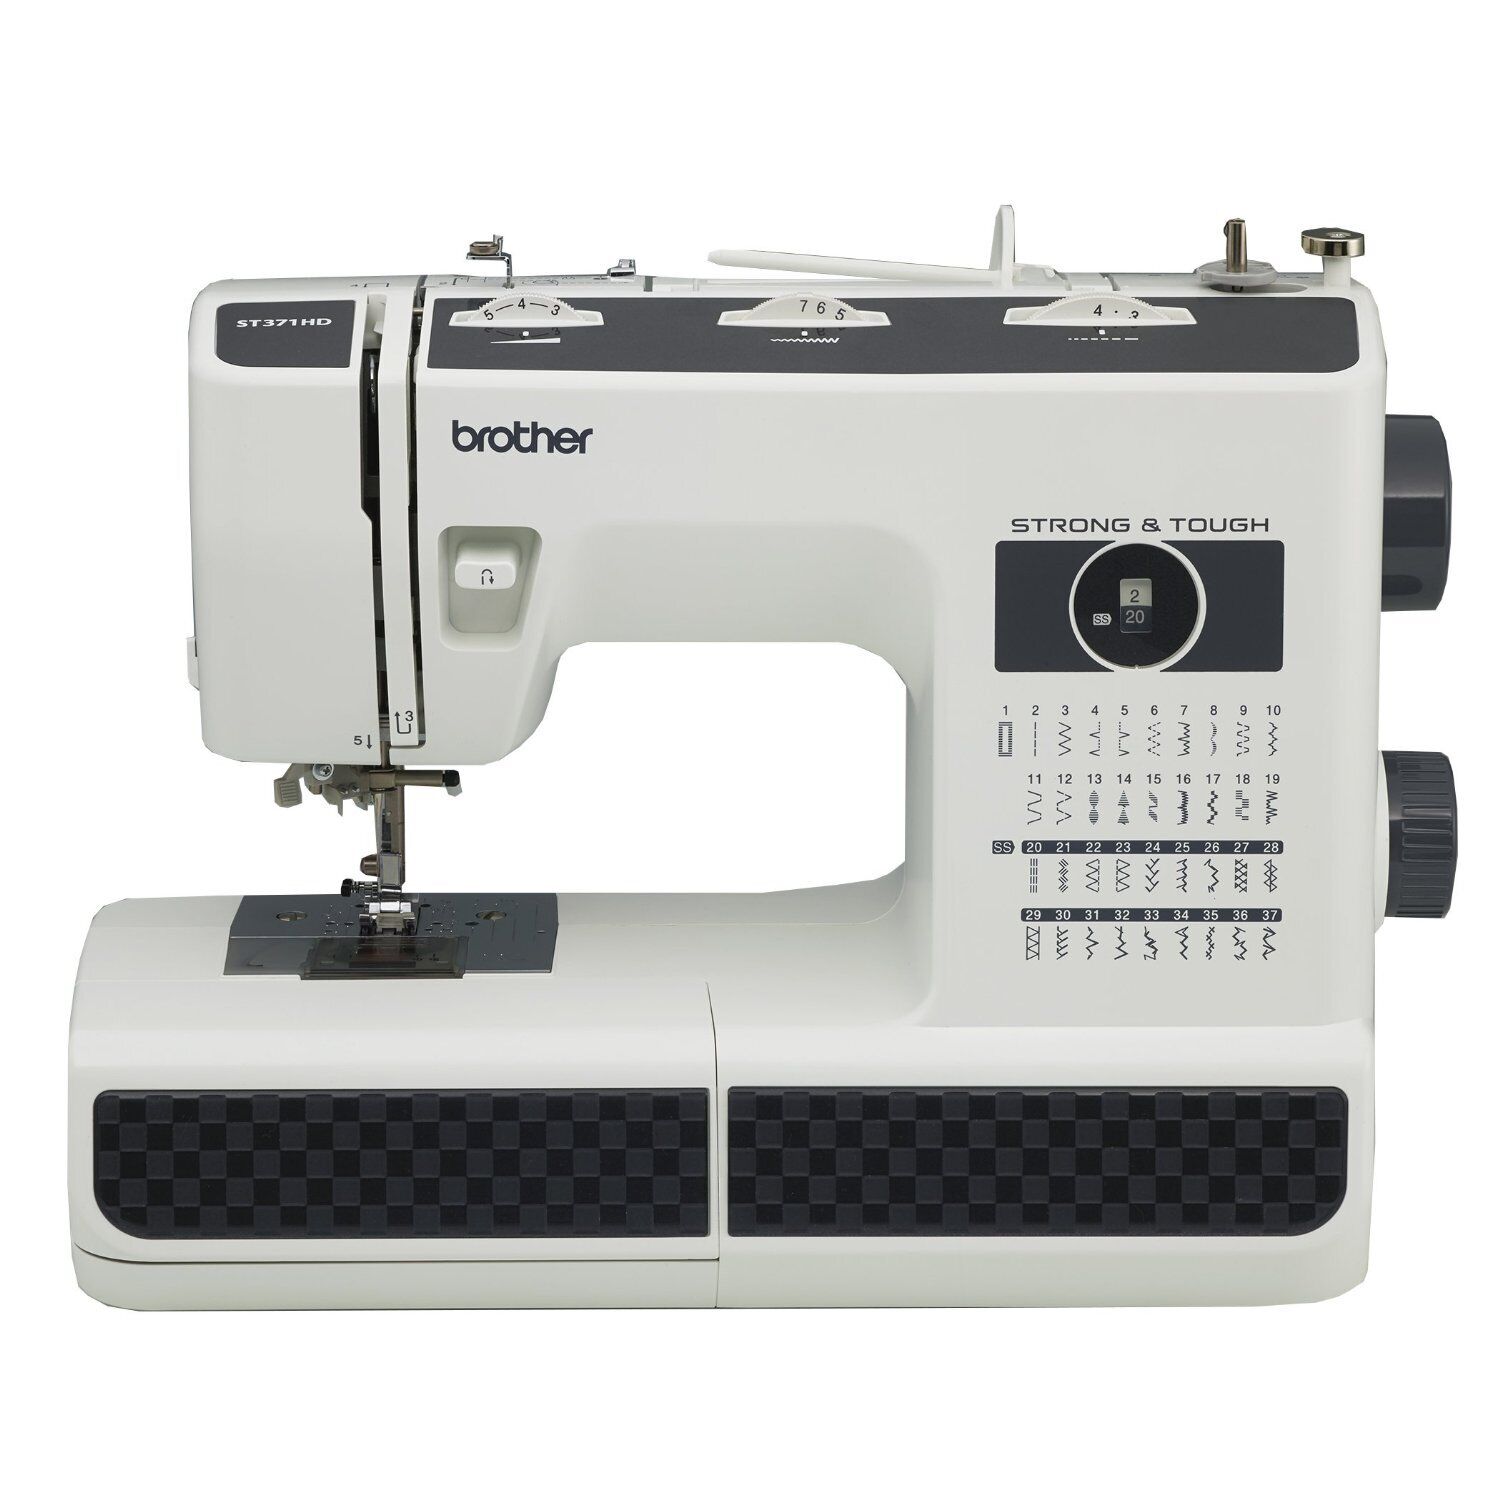 Brother ST371HD Strong and Tough Sewing Machine with 37 Stitches